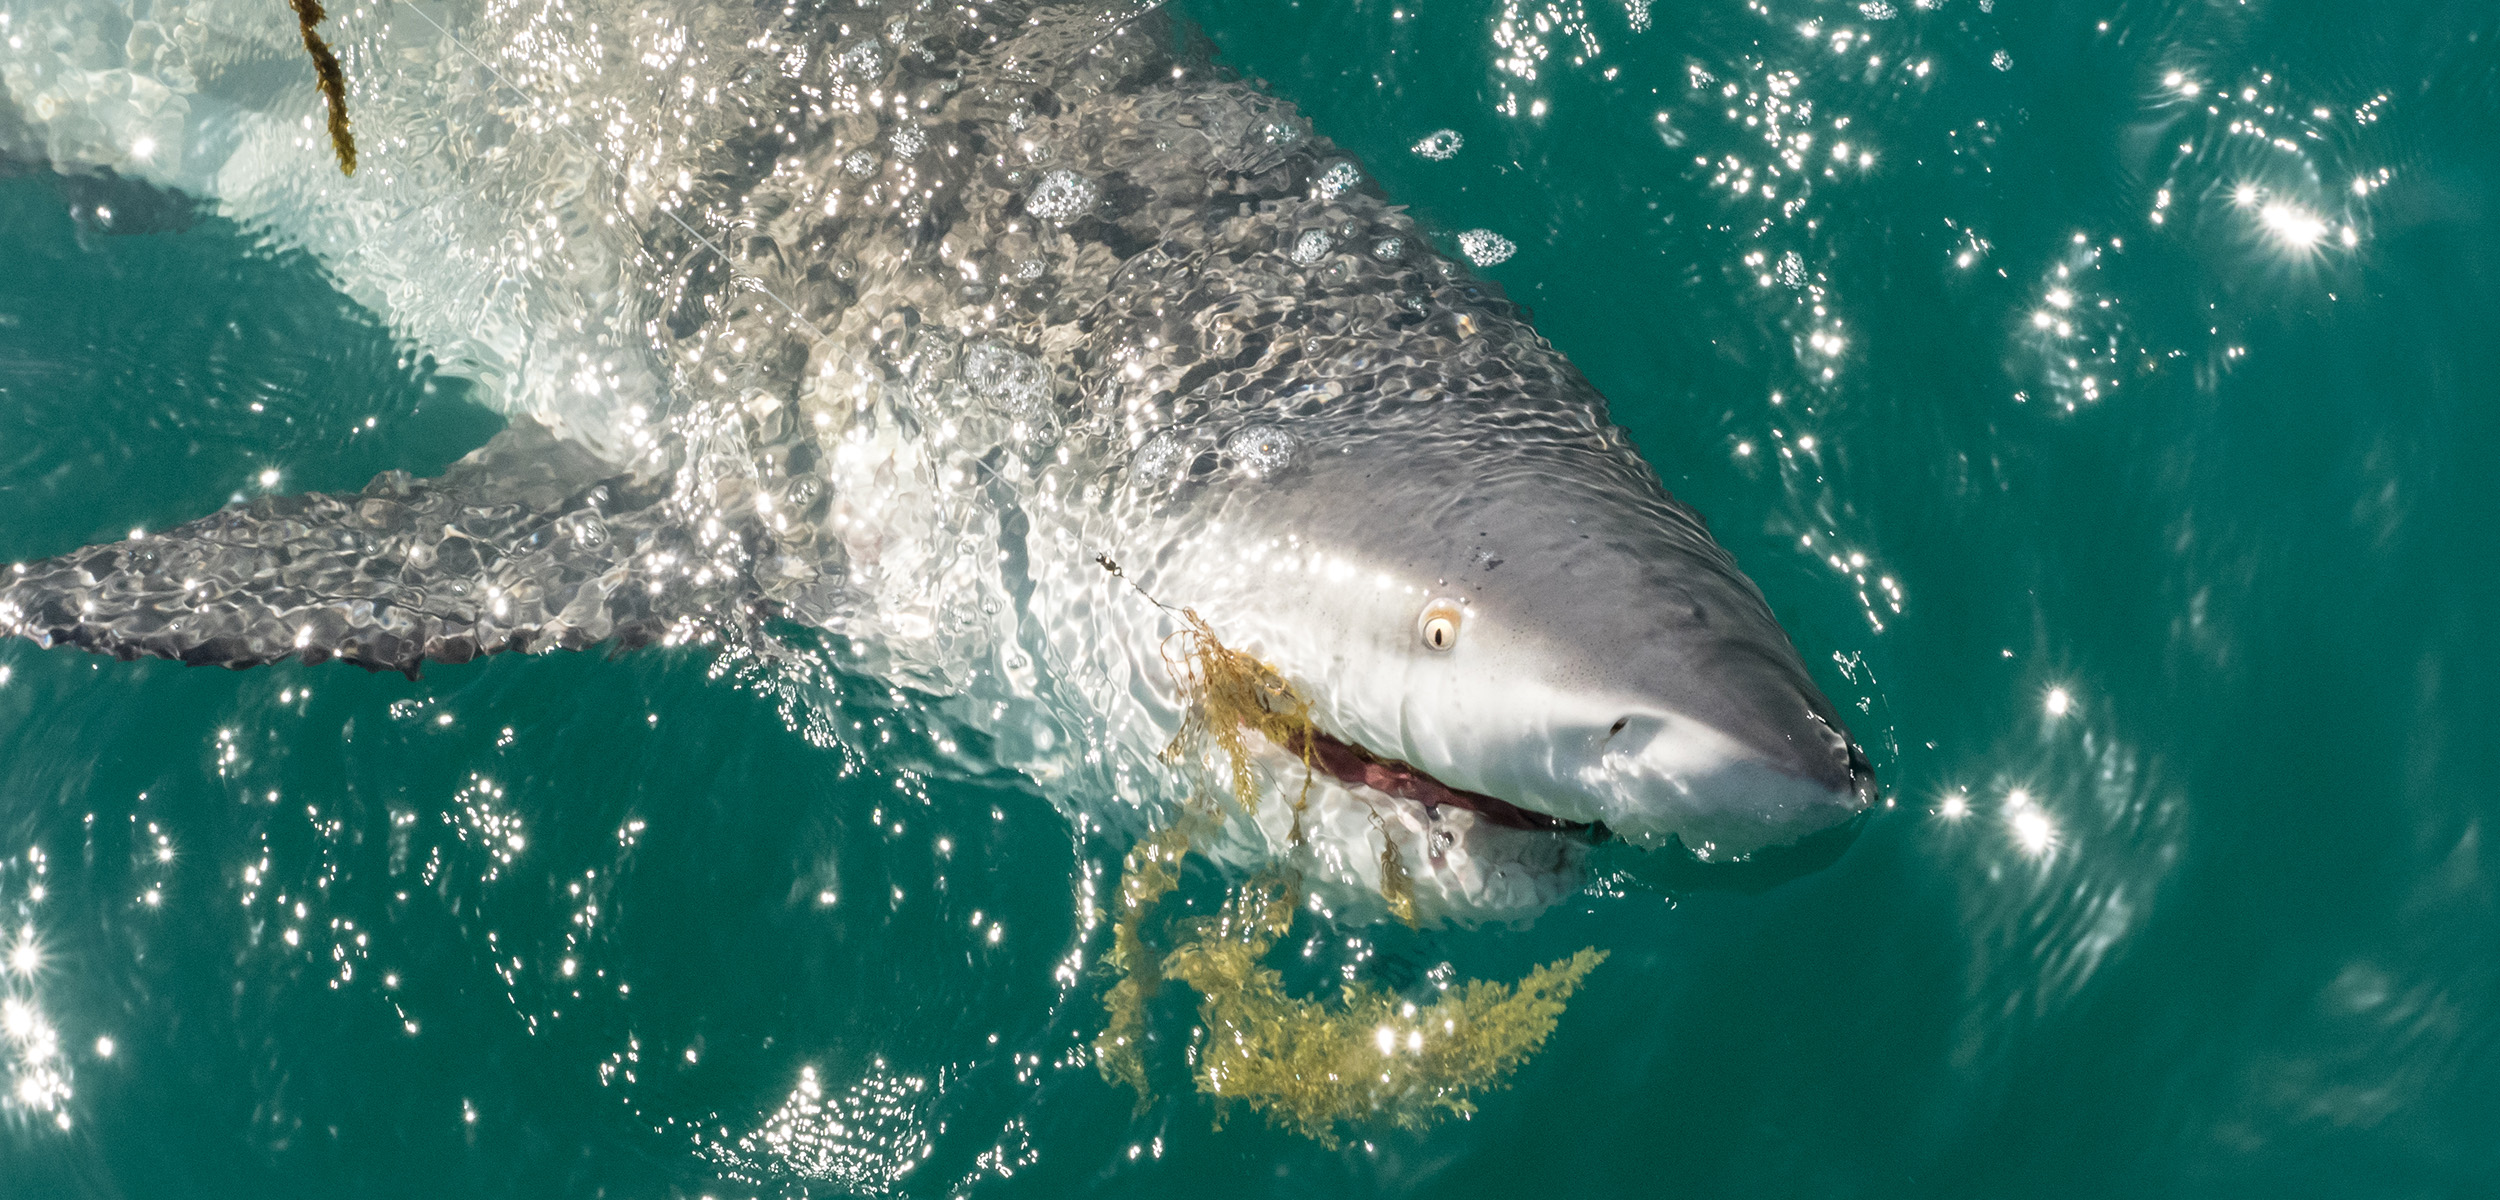 Like Shark Fishing? Catch And Release Isn't As Friendly As You Think.